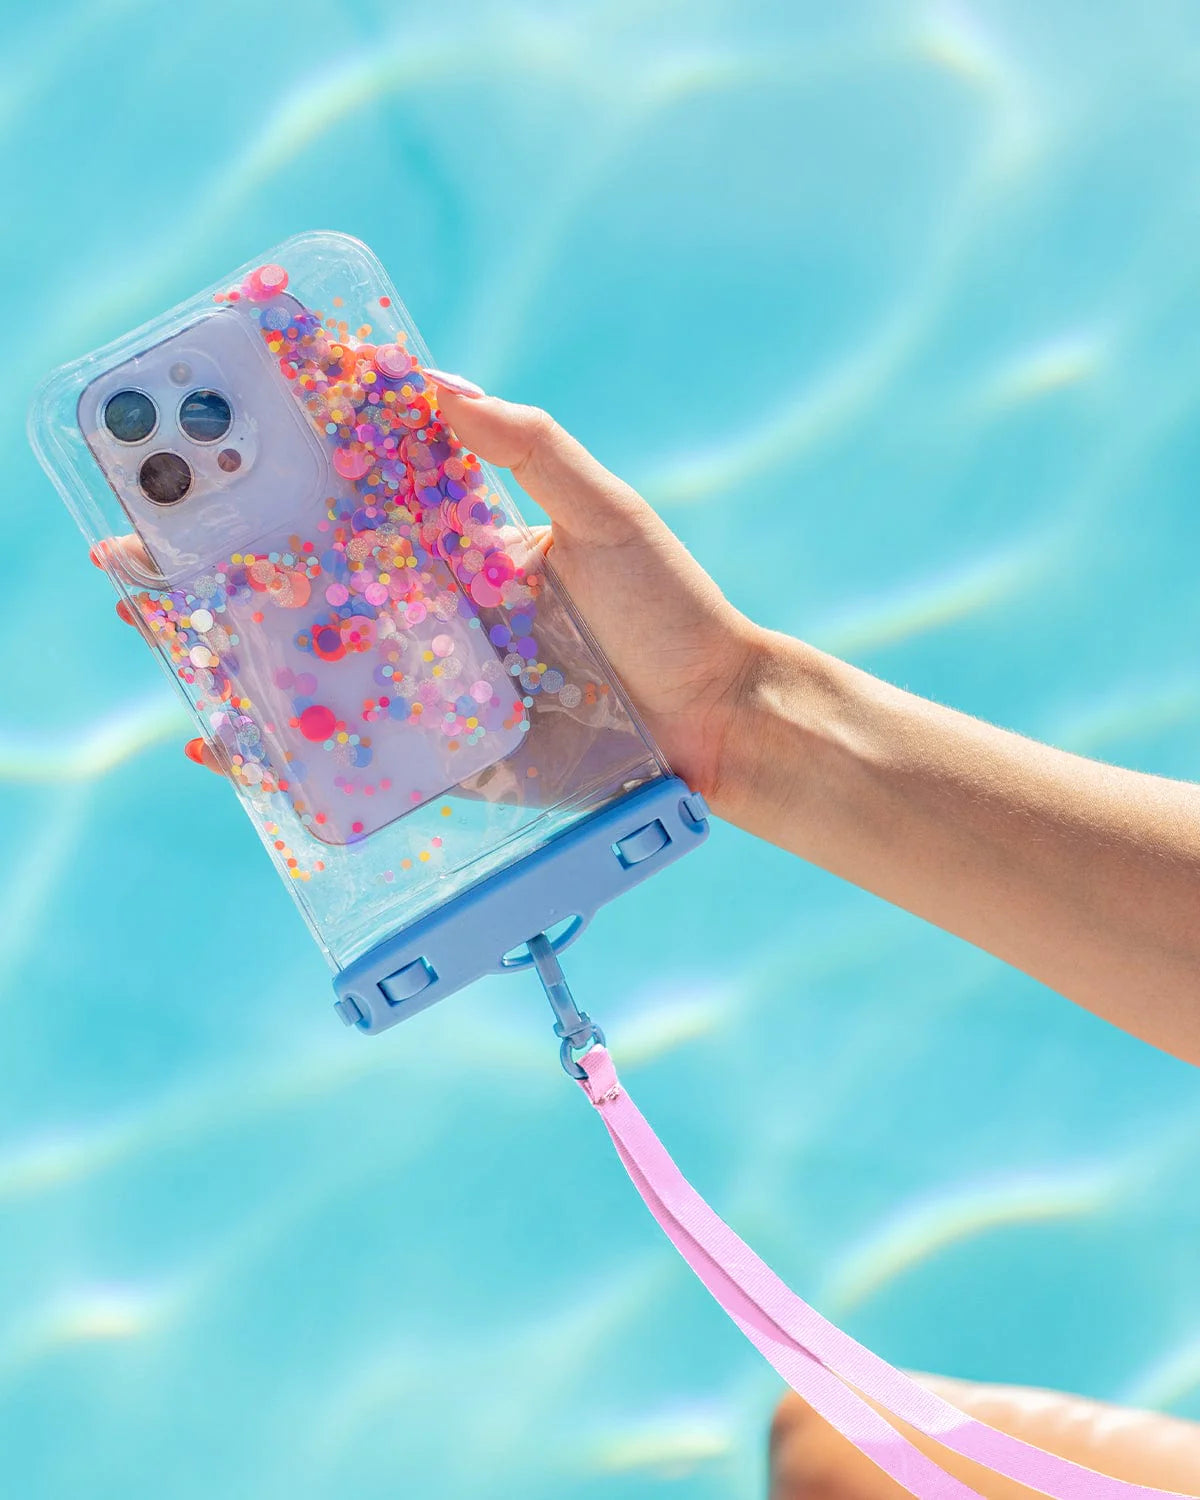 Bring on the fun waterproof protective phone holder